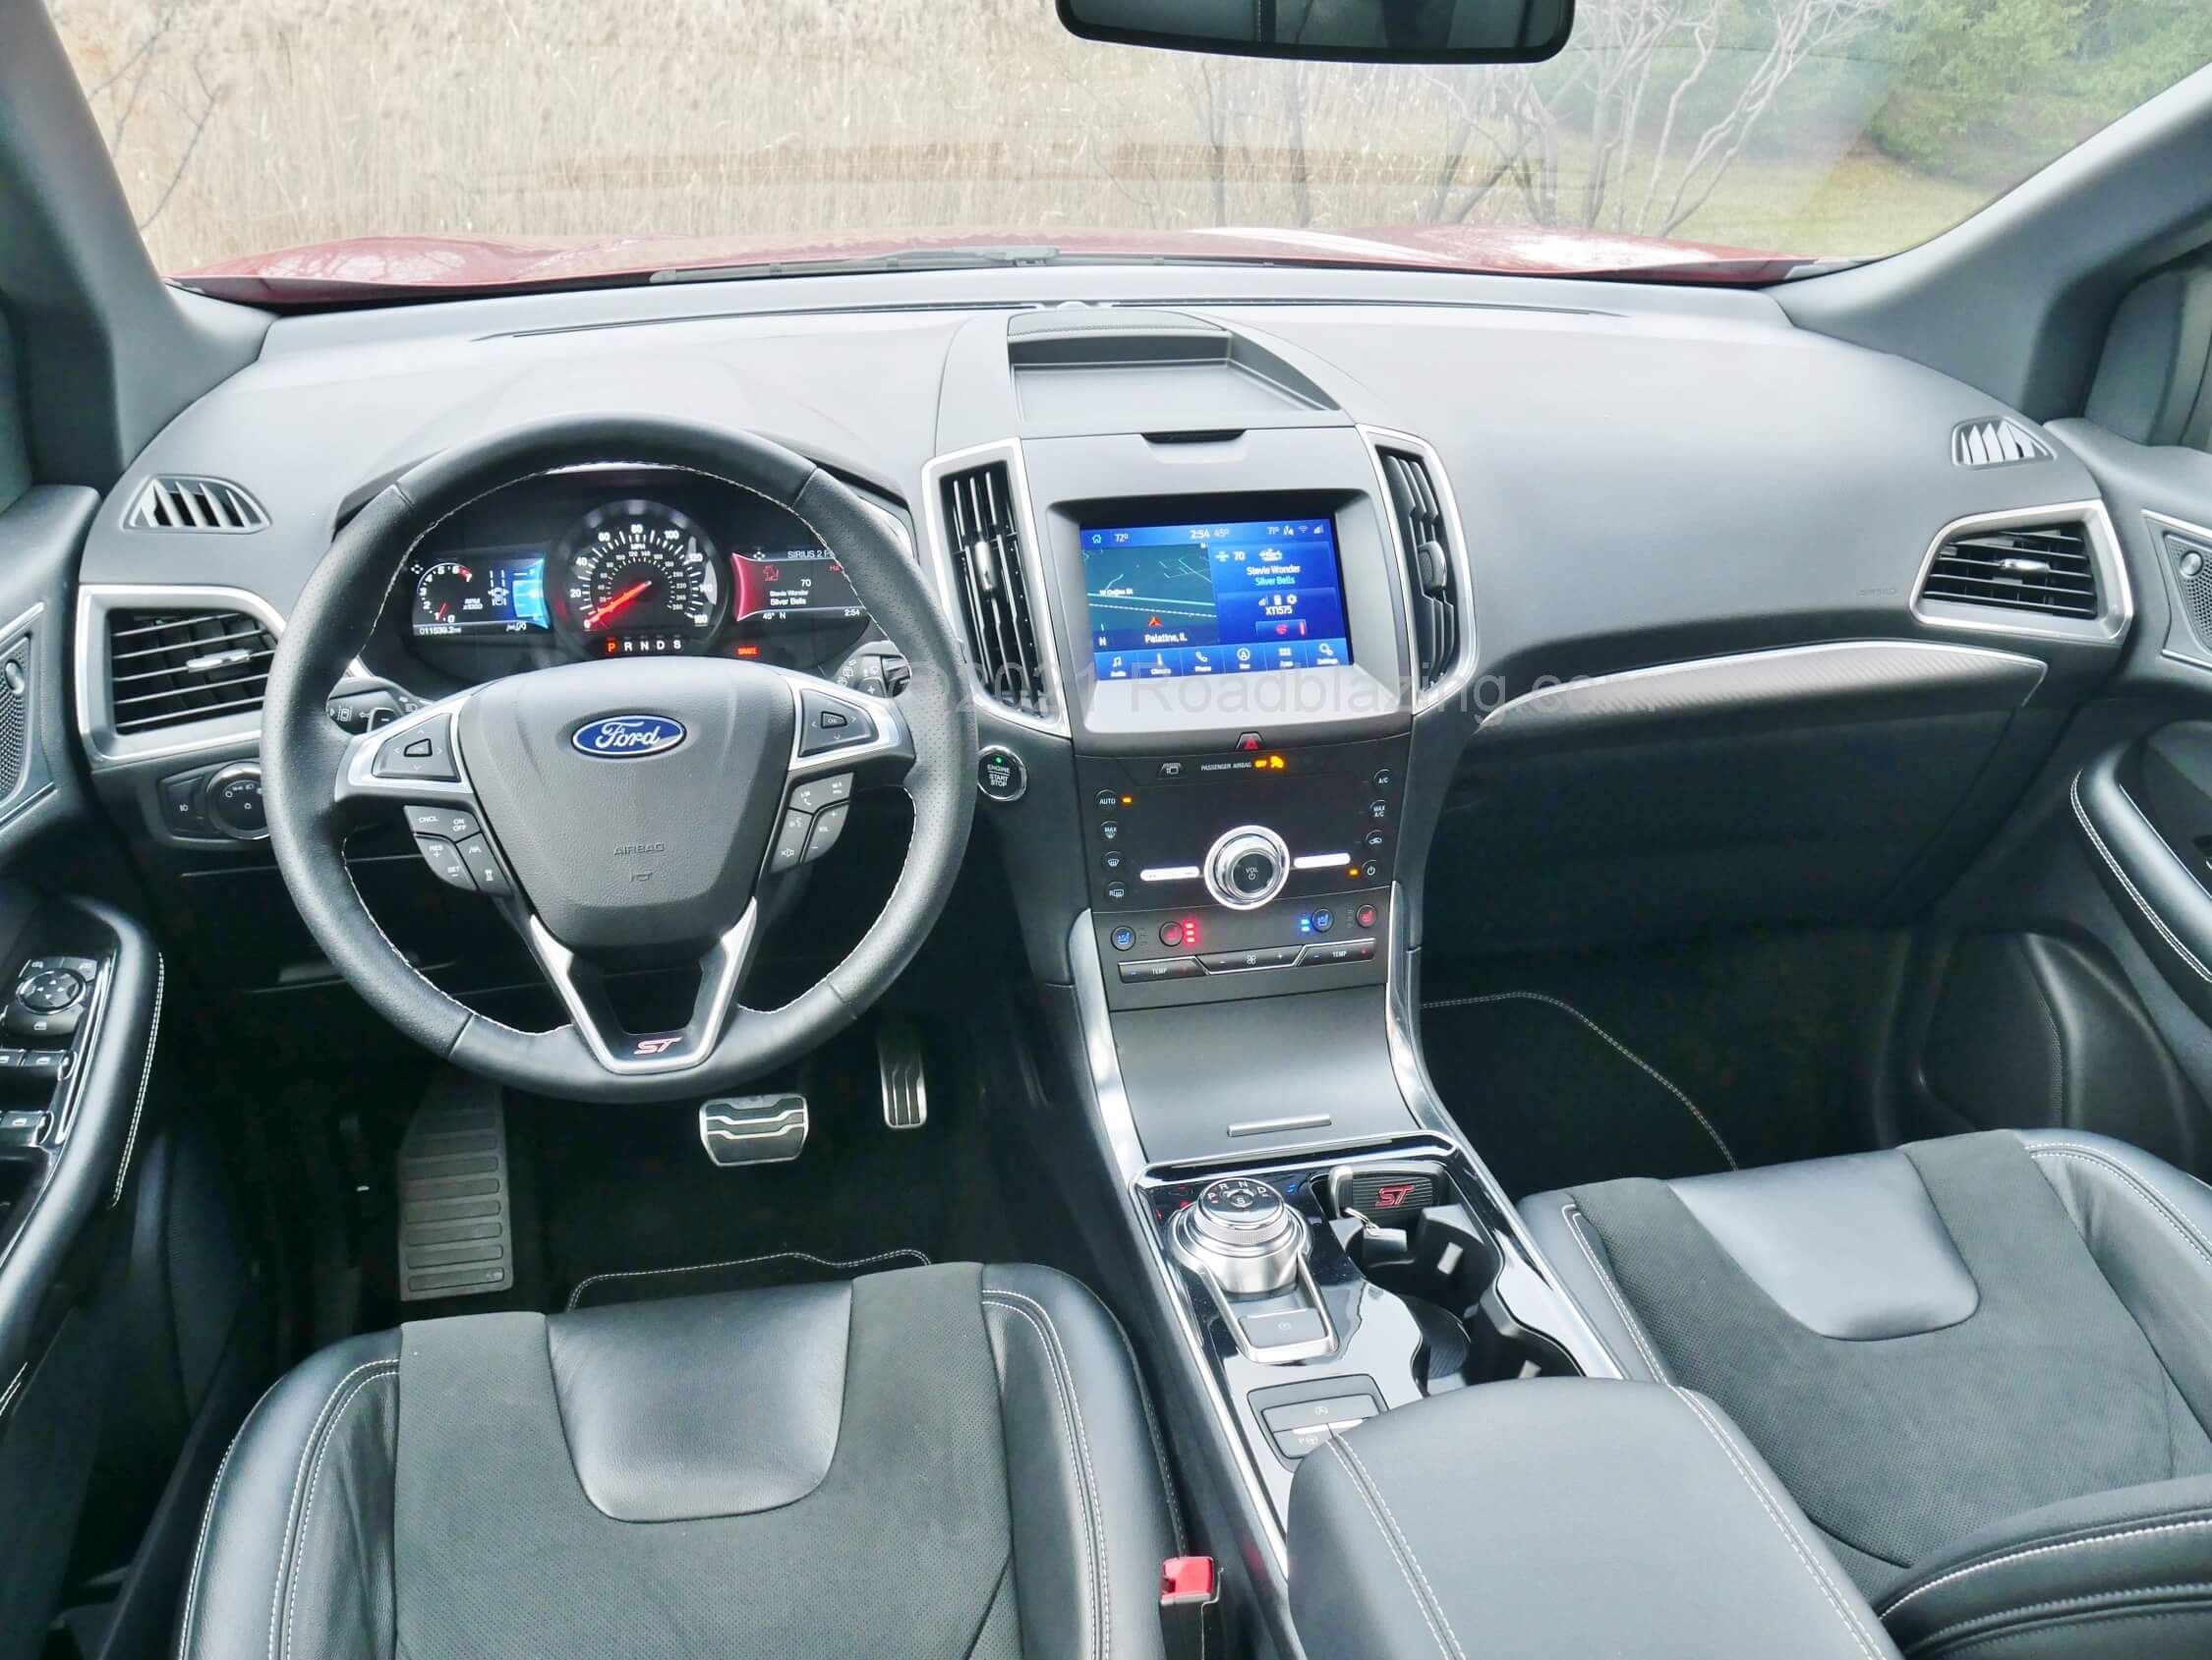 2020 Ford Edge ST: twin cowl style cockpit w/ minimal switchgear and colorful if slightly dated TFT instrumentation and SYNC3 MyTouch infotainment displays